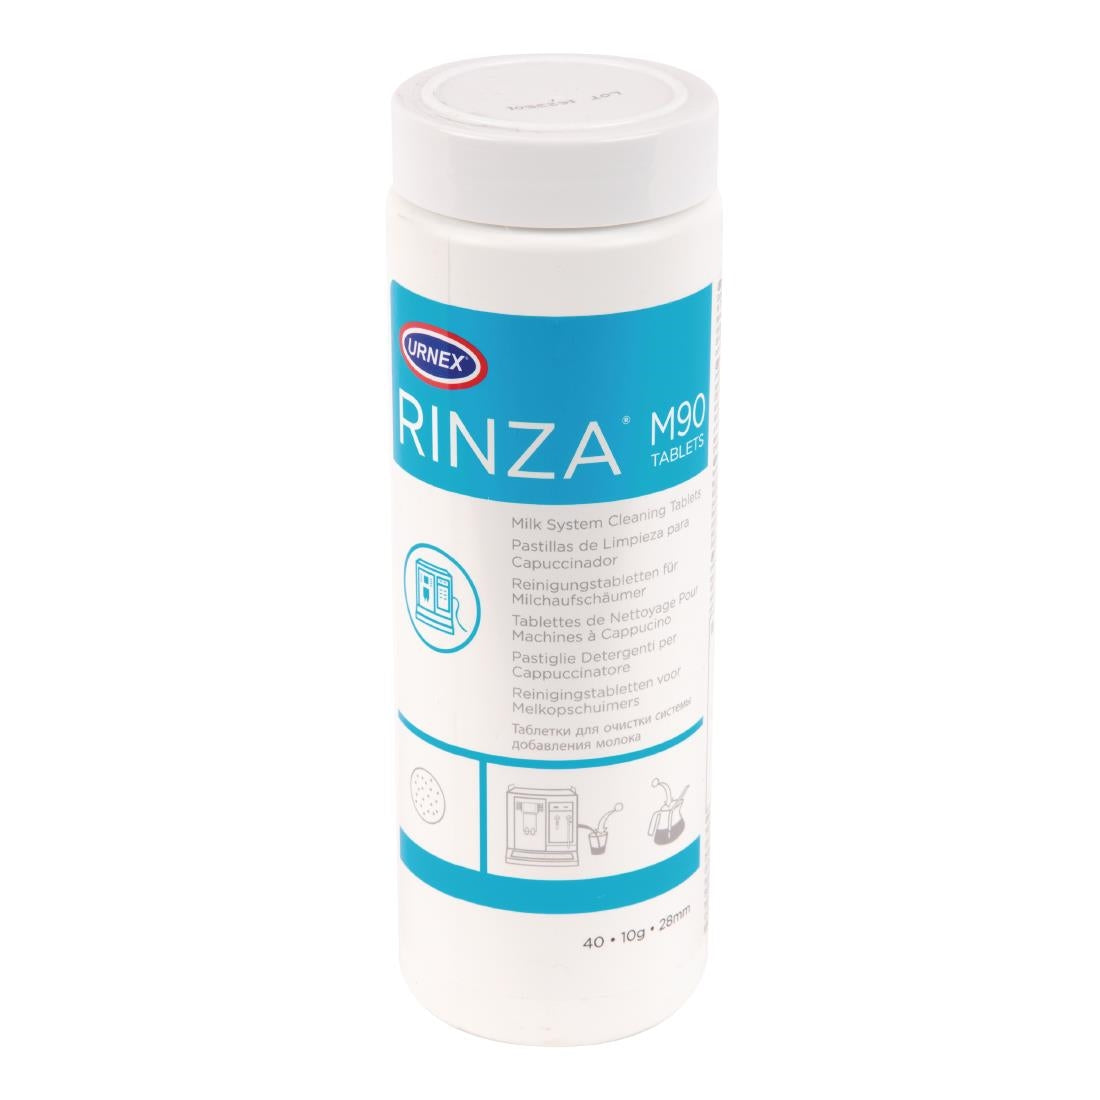 CX502 Urnex Rinza M90 Milk Frother Cleaner Tablets 10g (Pack of 40 Tablets) JD Catering Equipment Solutions Ltd